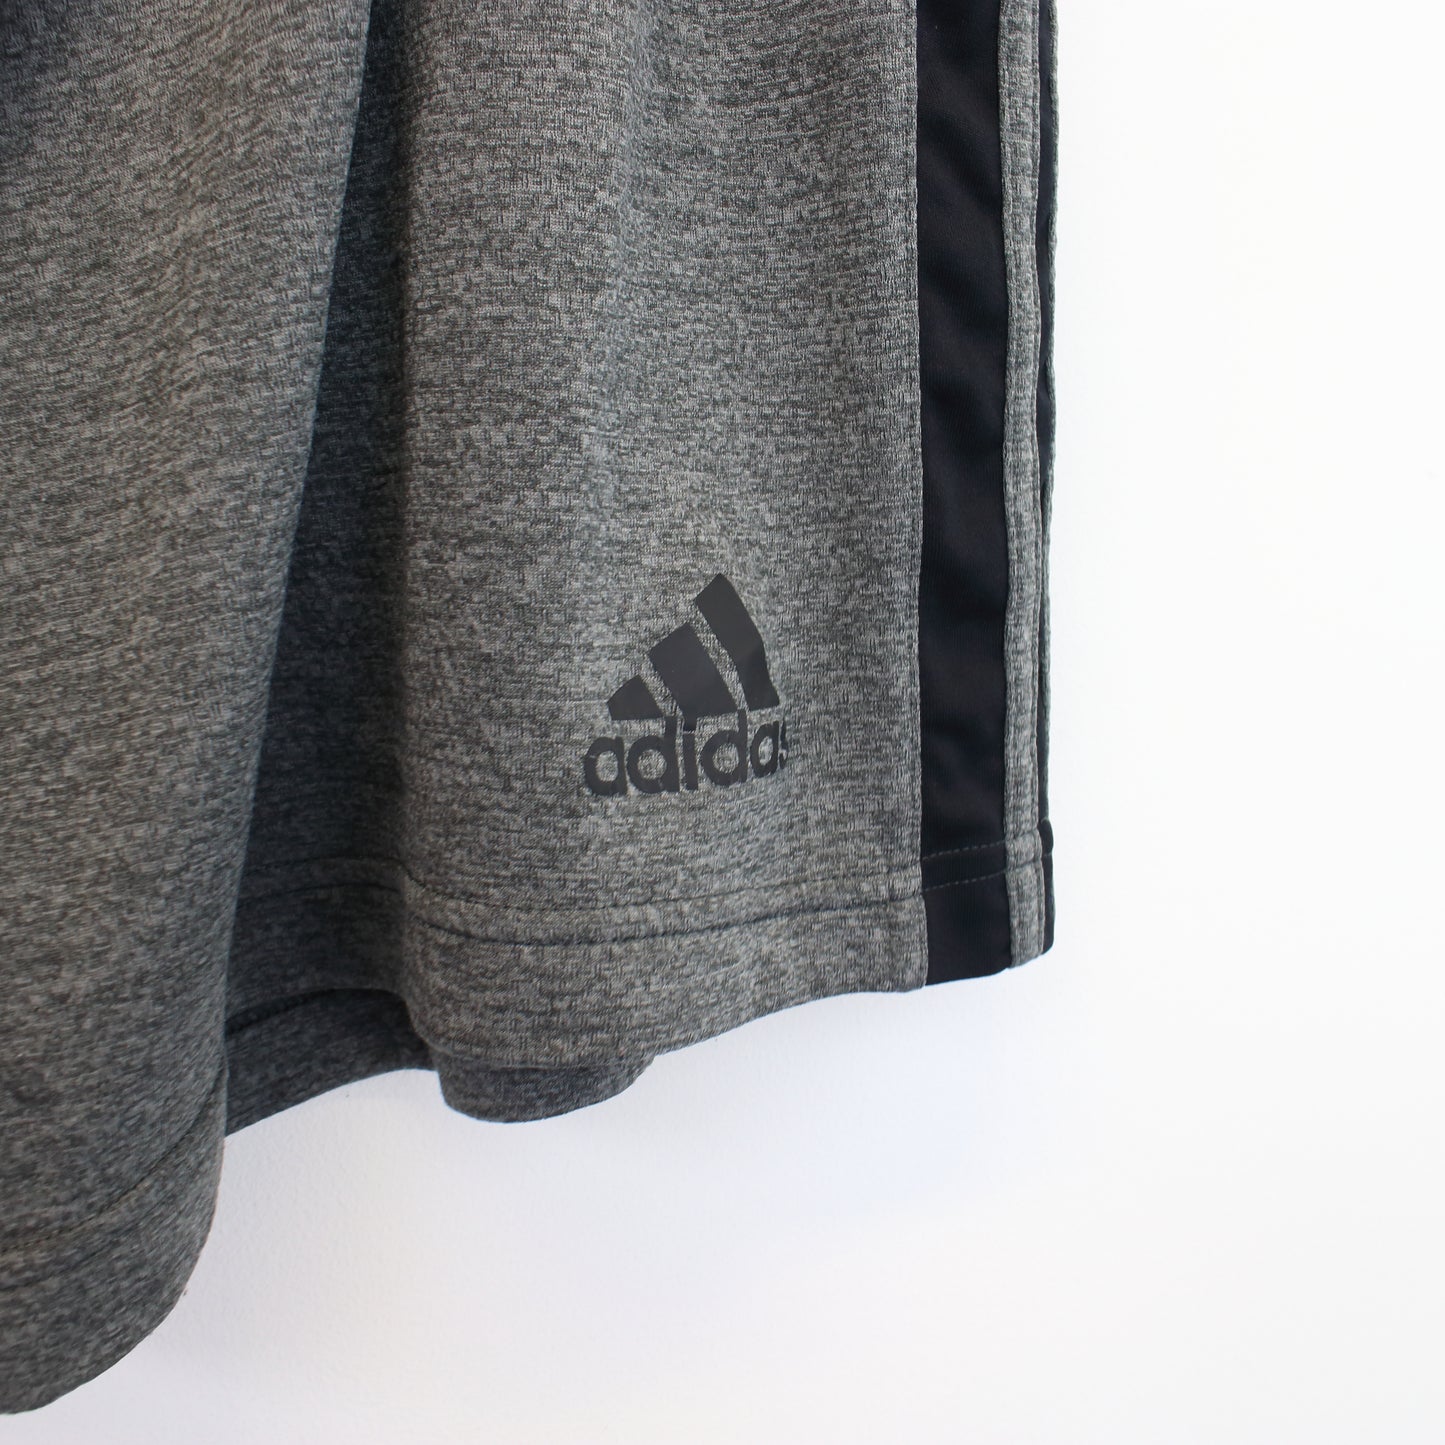 Vintage Adidas shorts in black and grey. Best fits XXL